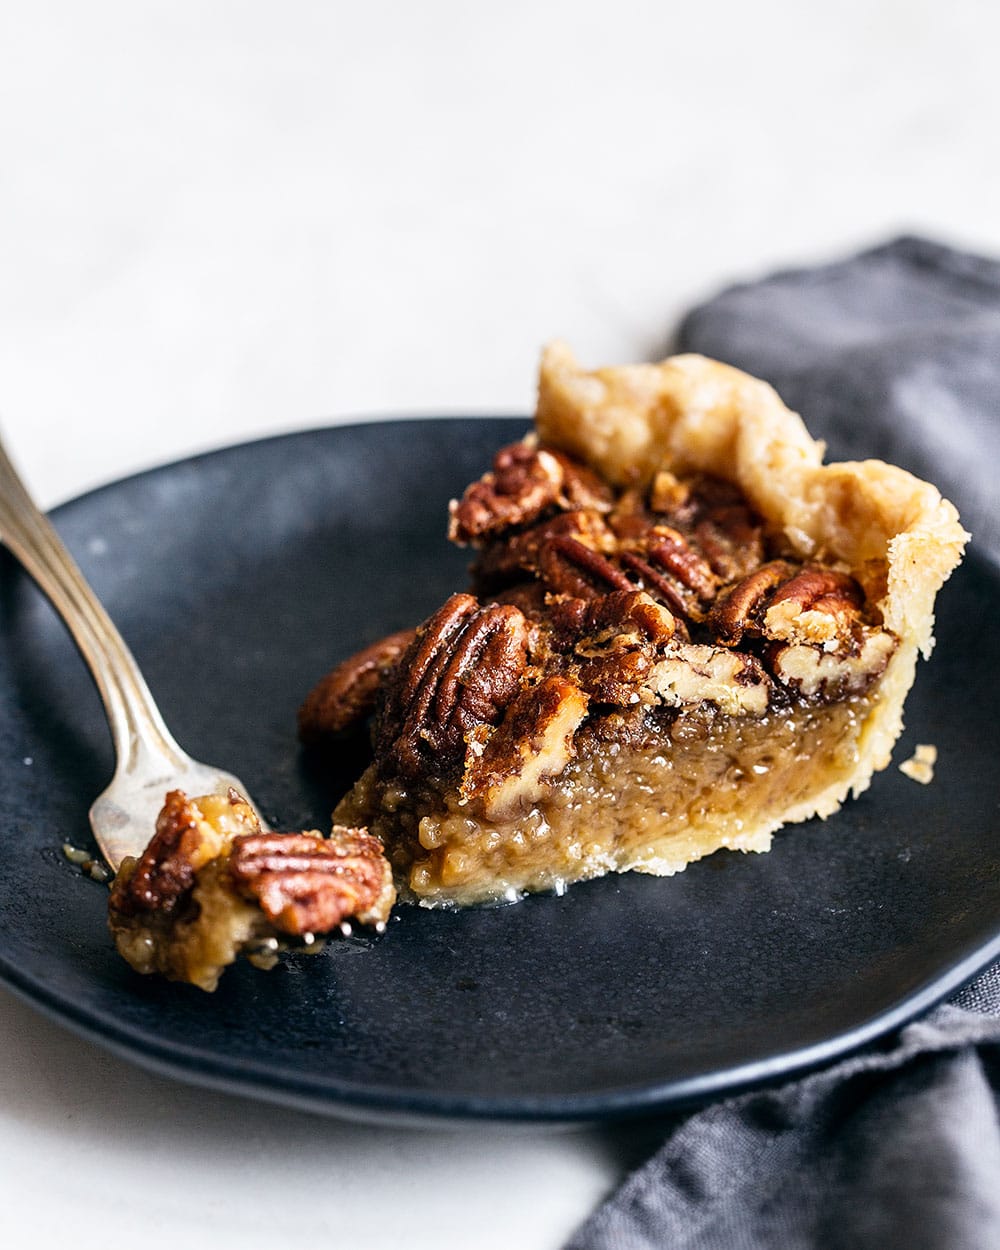 Slice of homemade Pecan Pie on a plate